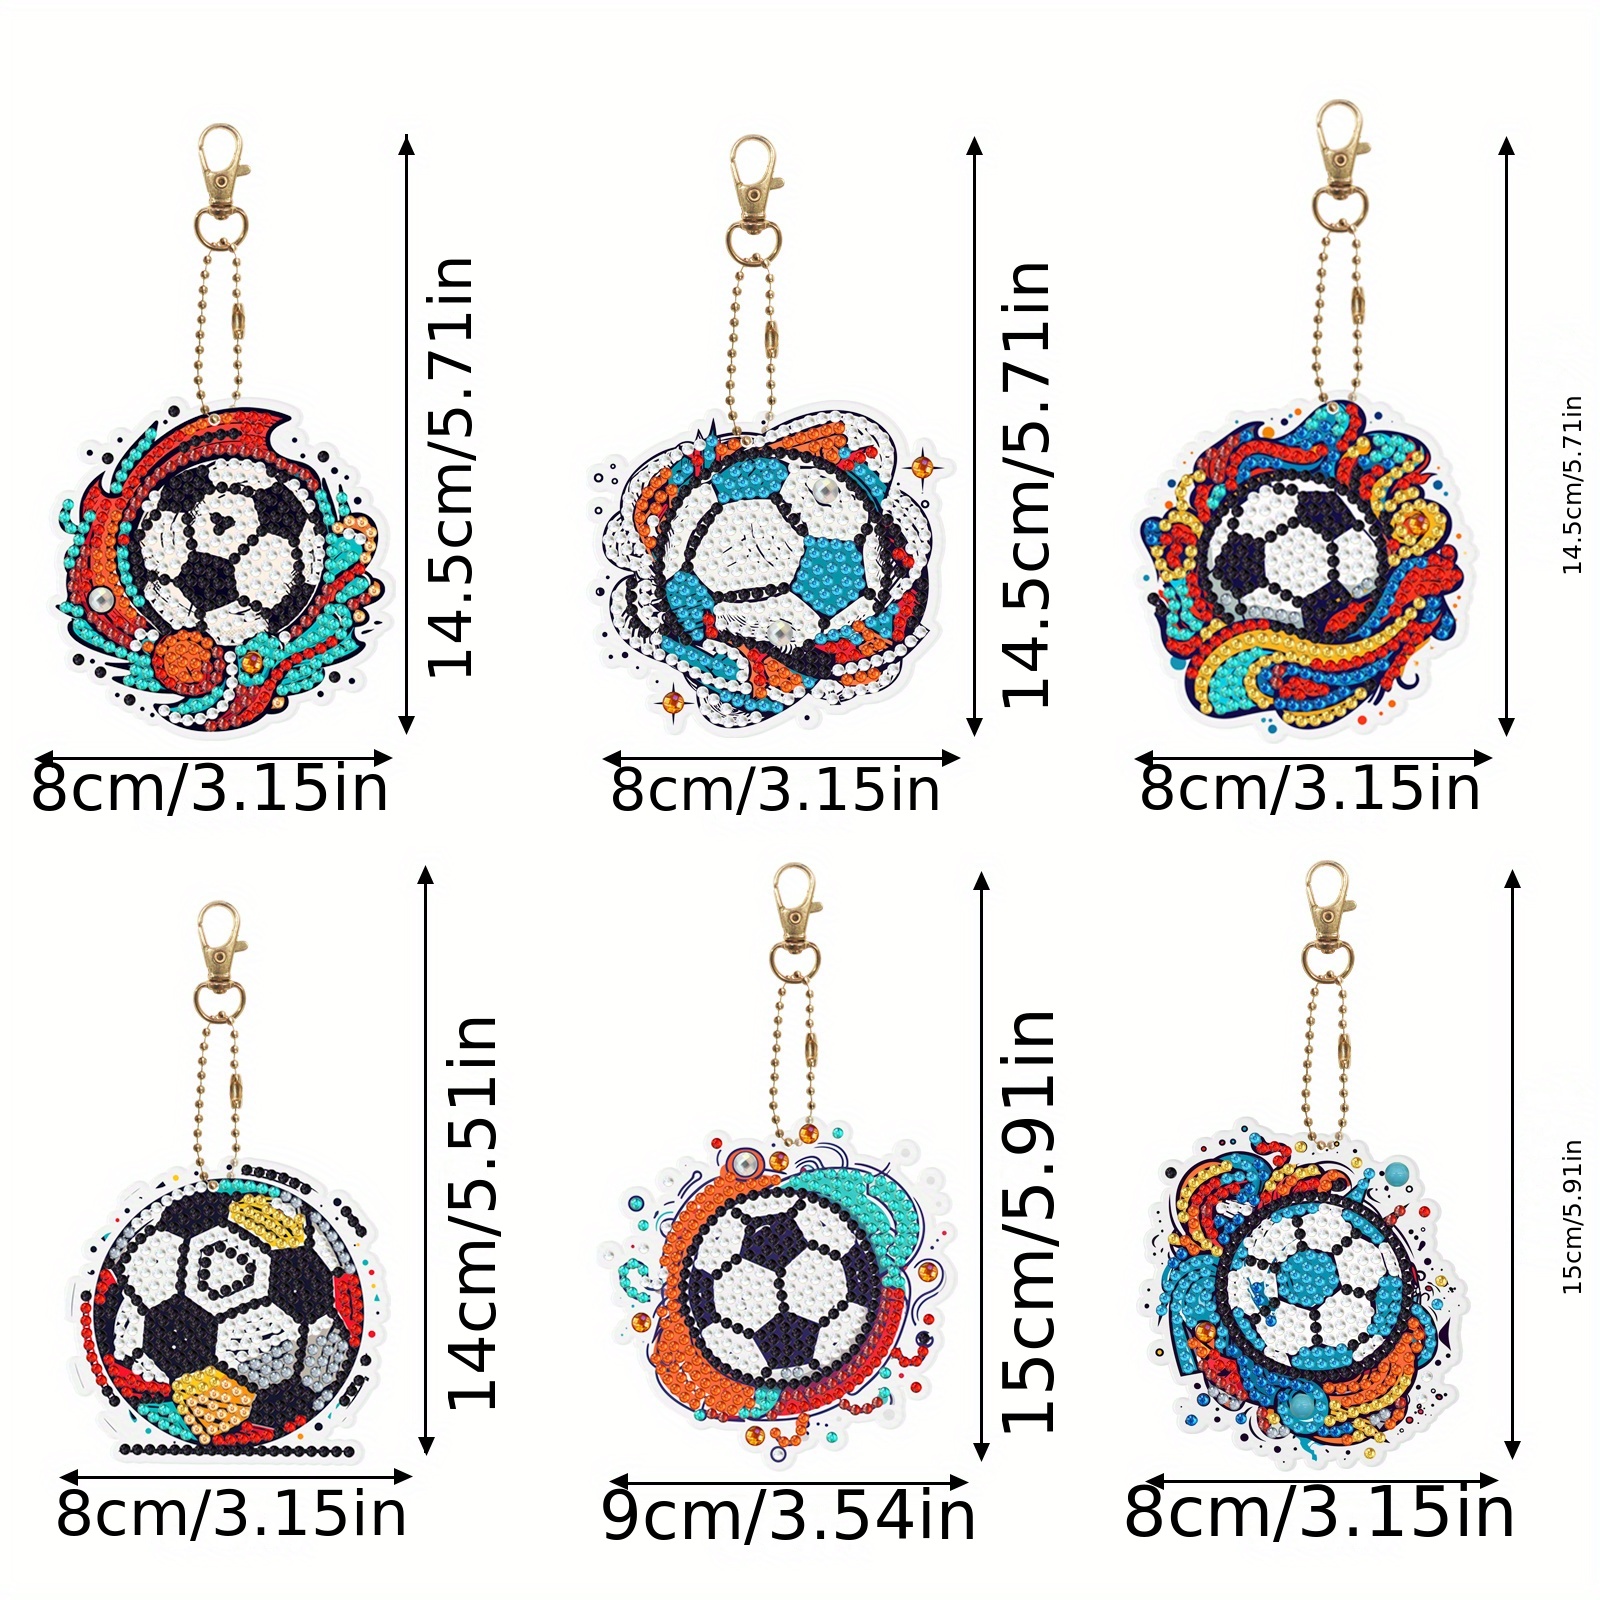 YLOLUL 10 Pcs Balls Shaped Diamond Painting Coasters Kits DIY Soccer Ball  Football Diamond Painting Coasters with Holder for Beginners Adults and  Kids